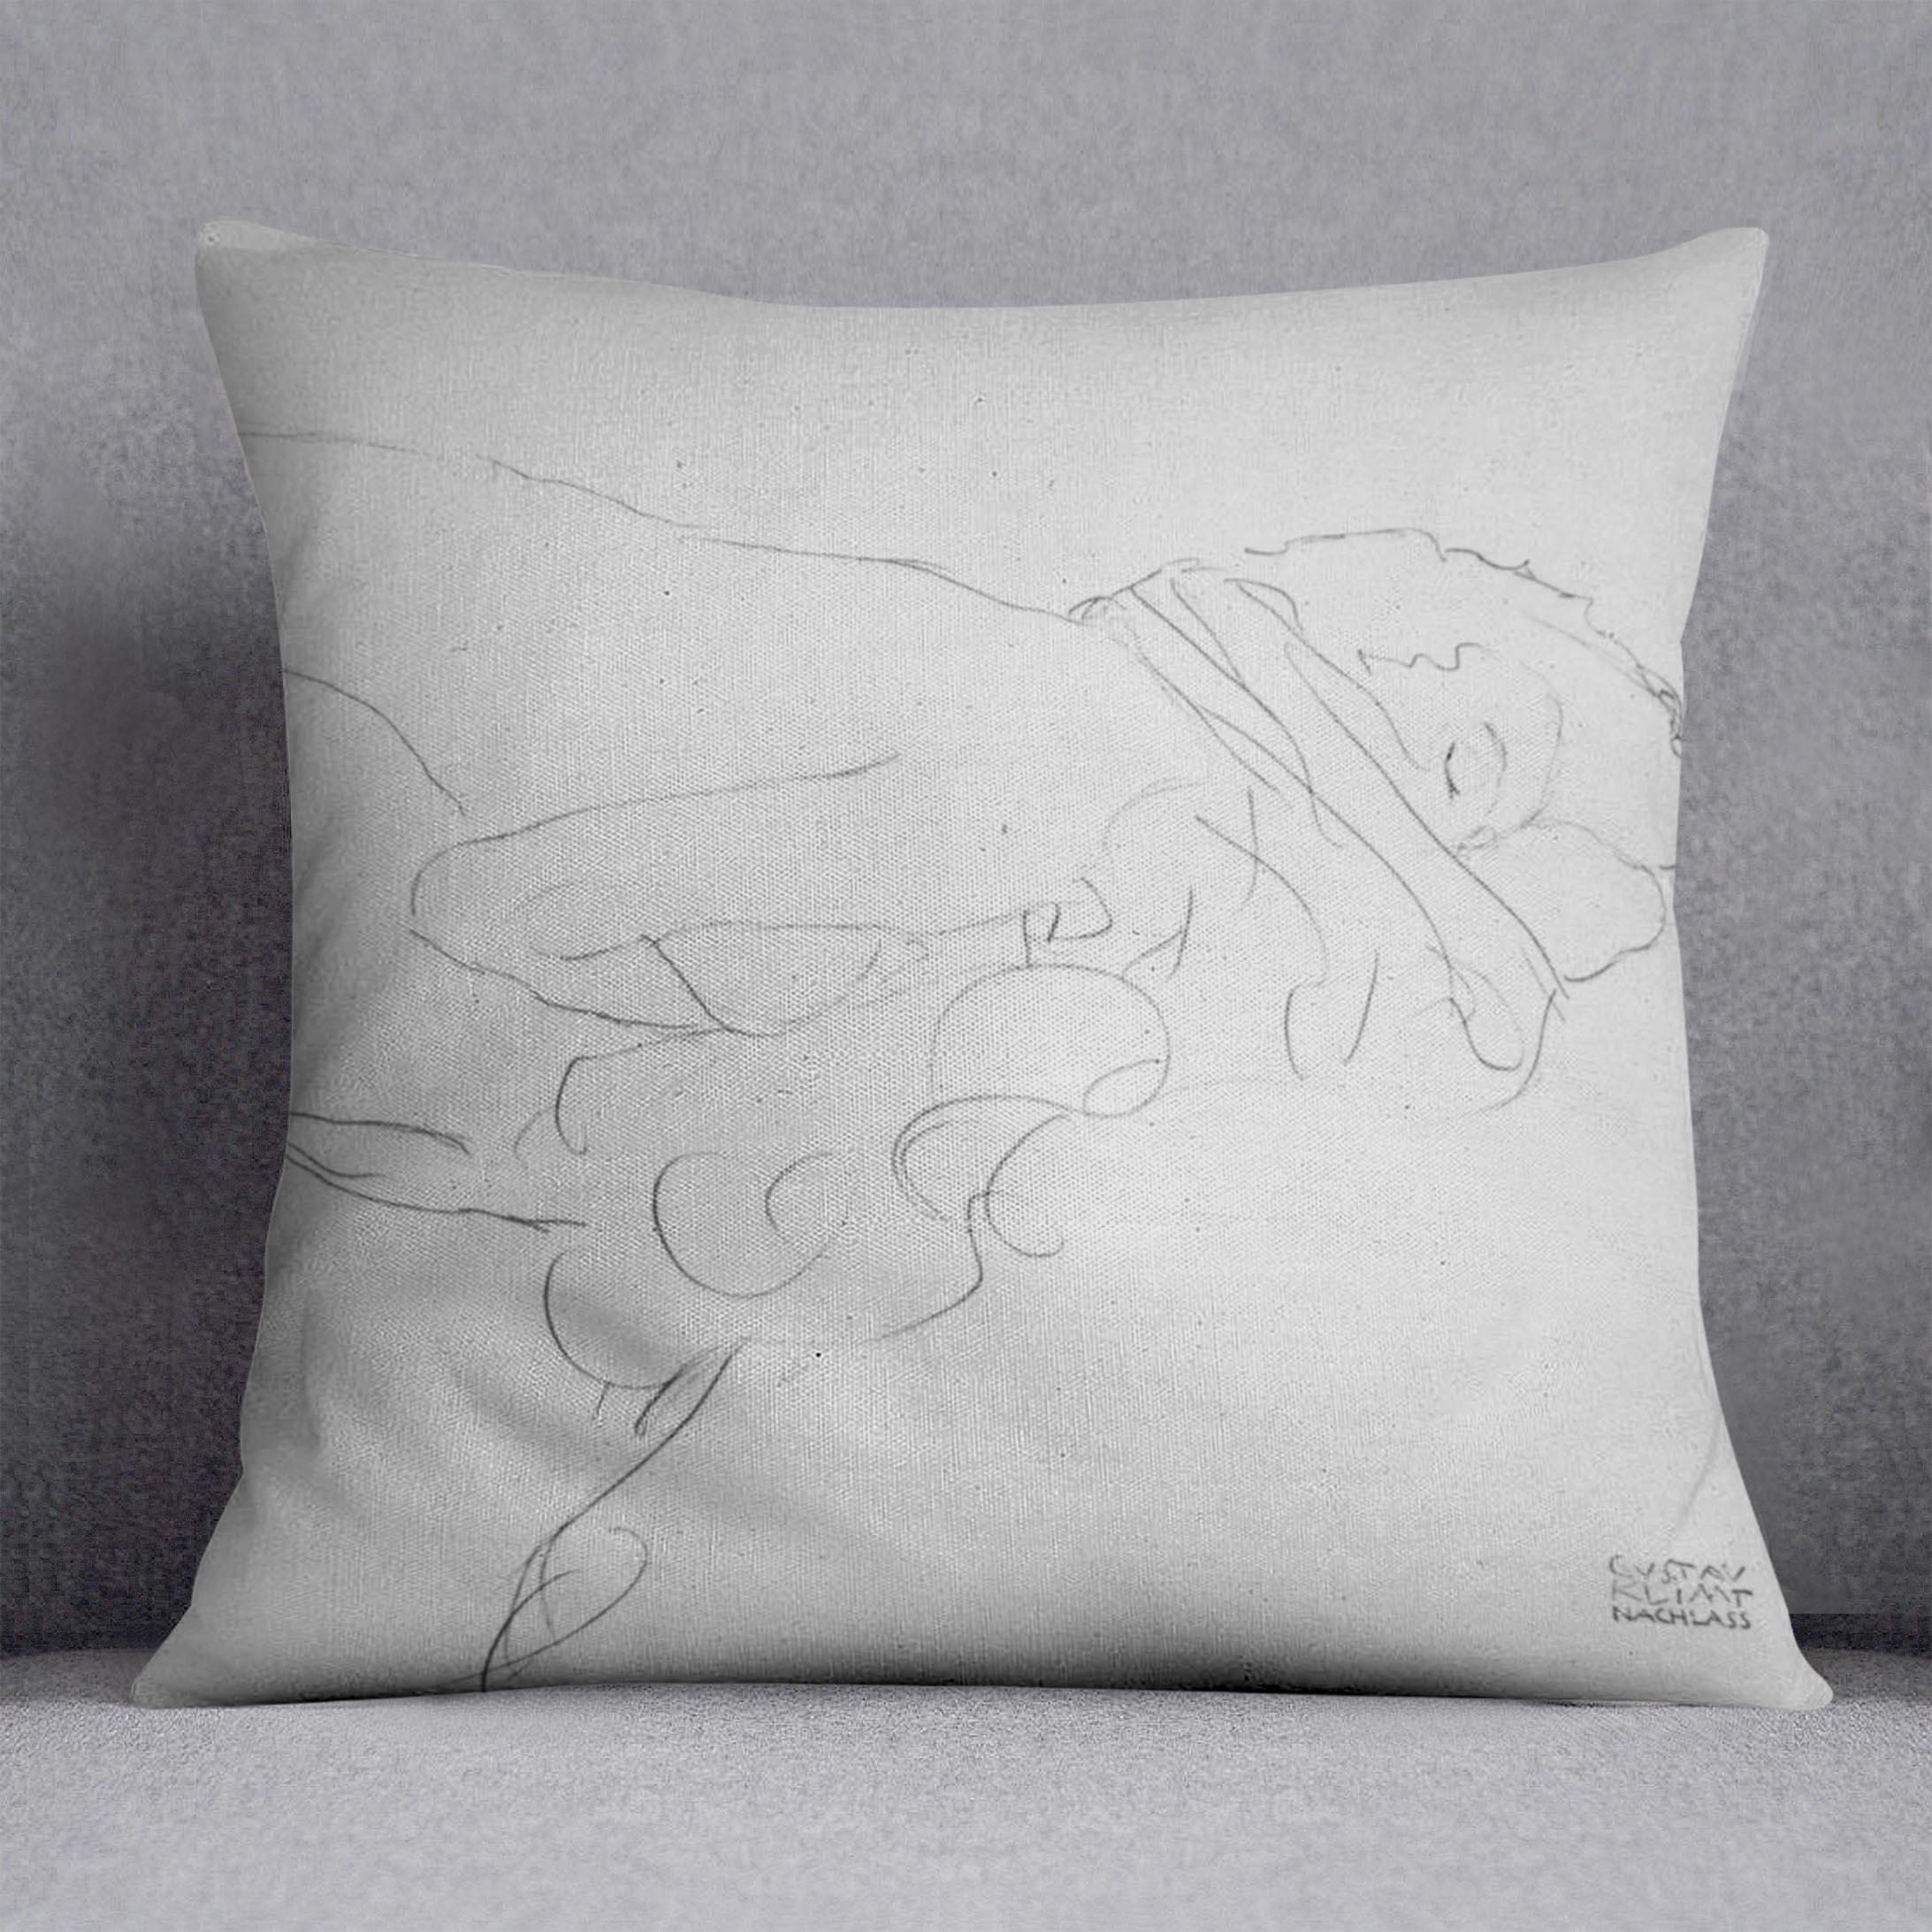 Crouching to right by Klimt Cushion